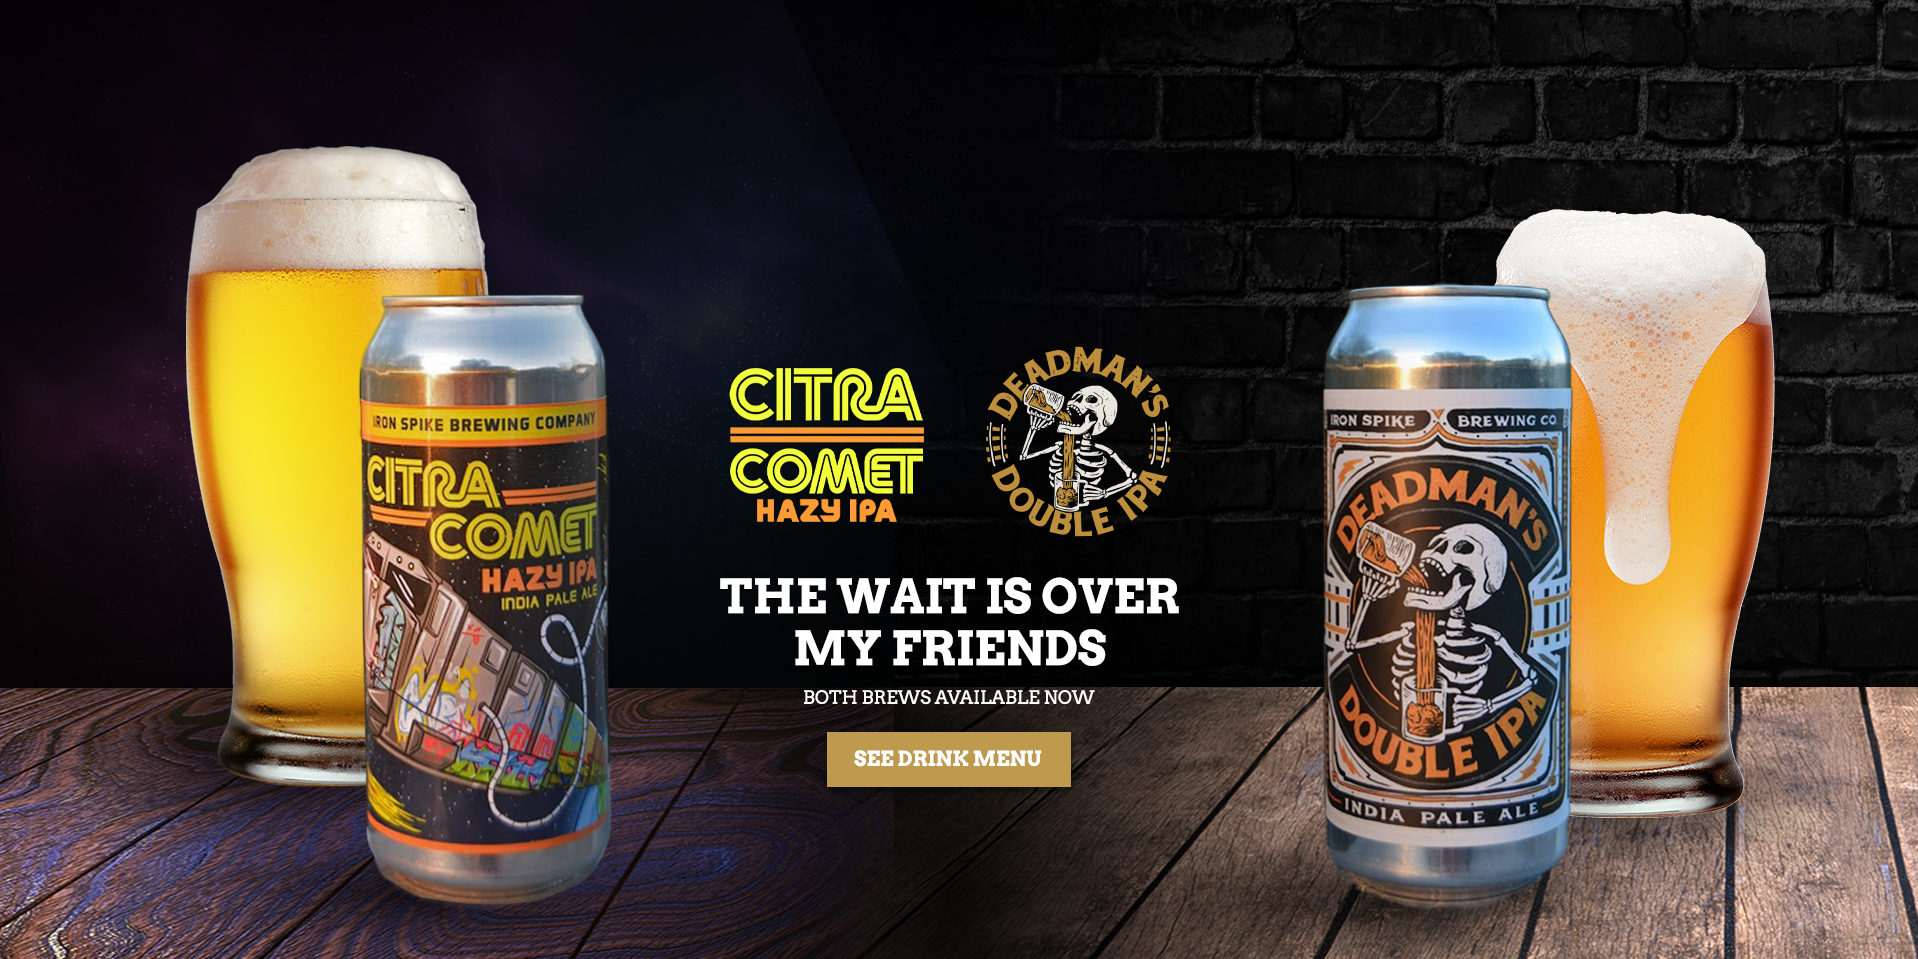 Citra Comet Hazy IPA - The wait is over my friends - Both brews available now - See Drink Menu